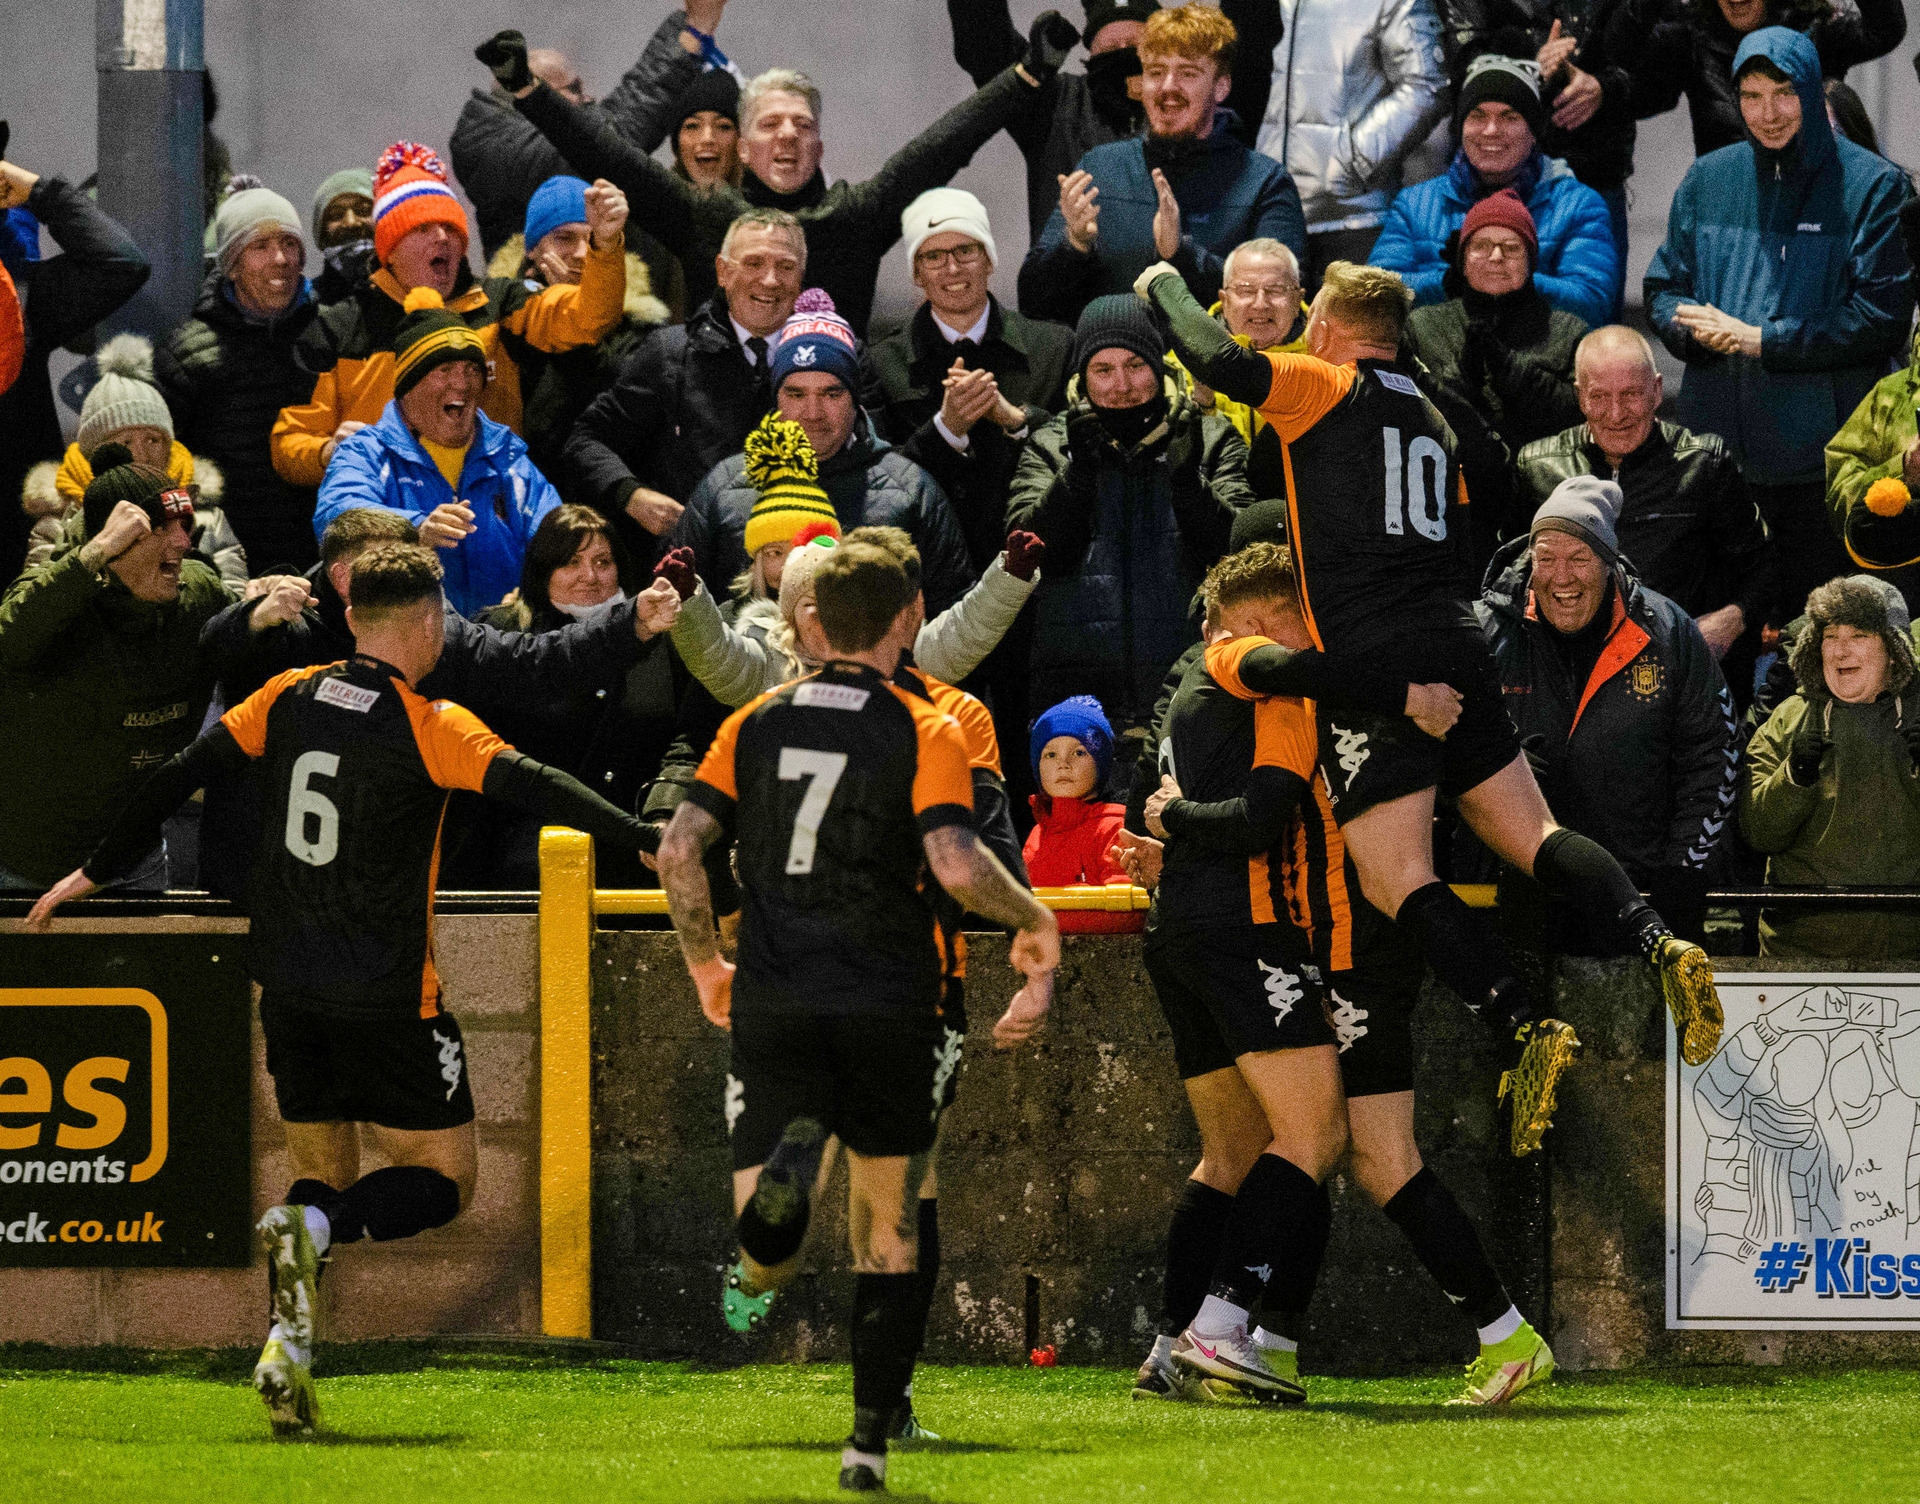 Wild celebrations as Graham Wilson scores the only goal of the match for the Ayrshire outfit.